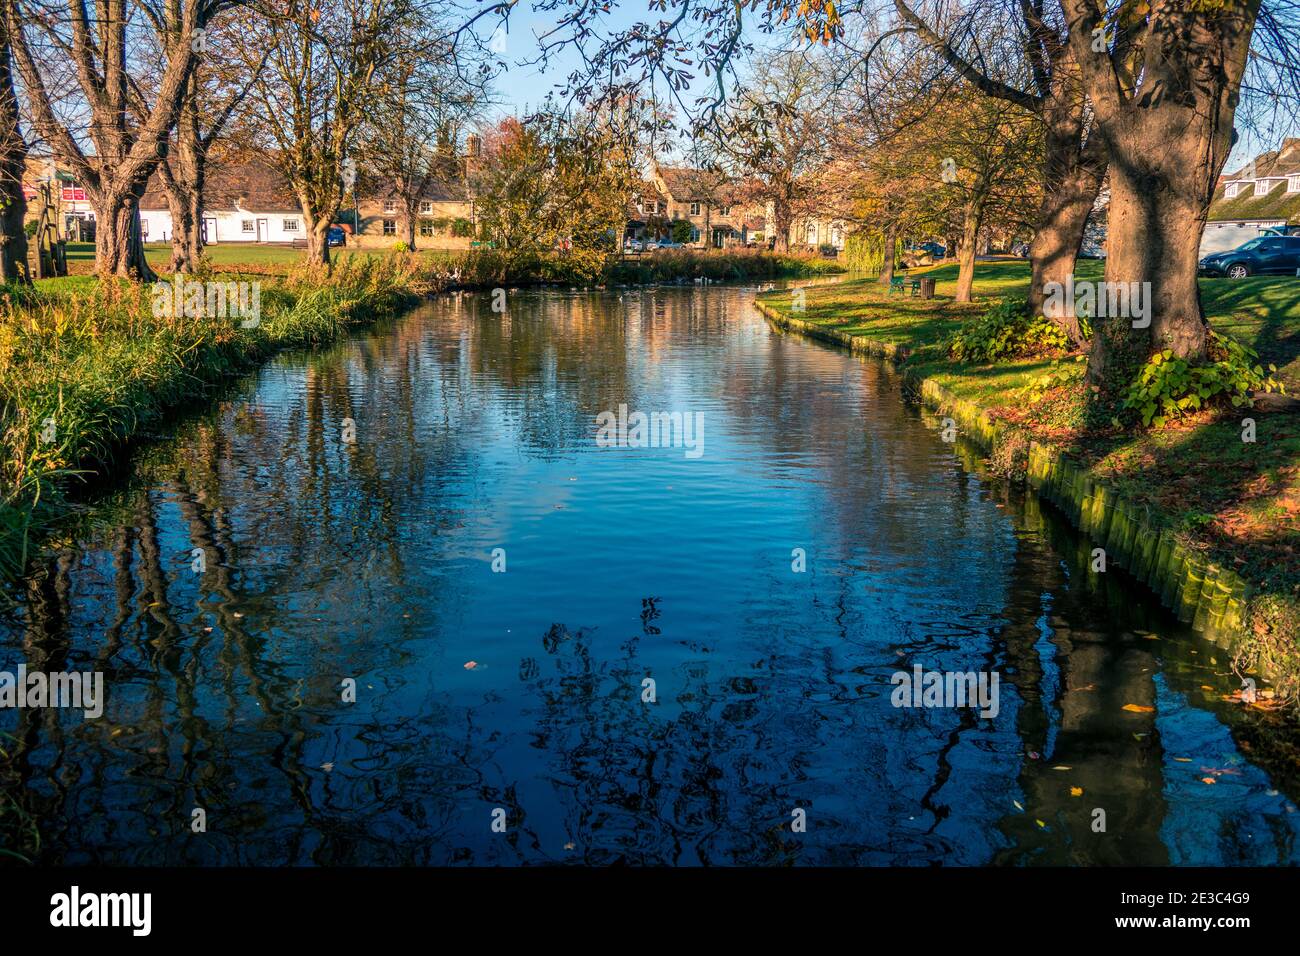 Autumn view of the Green and village pond at Histon near Cambridge England Stock Photo